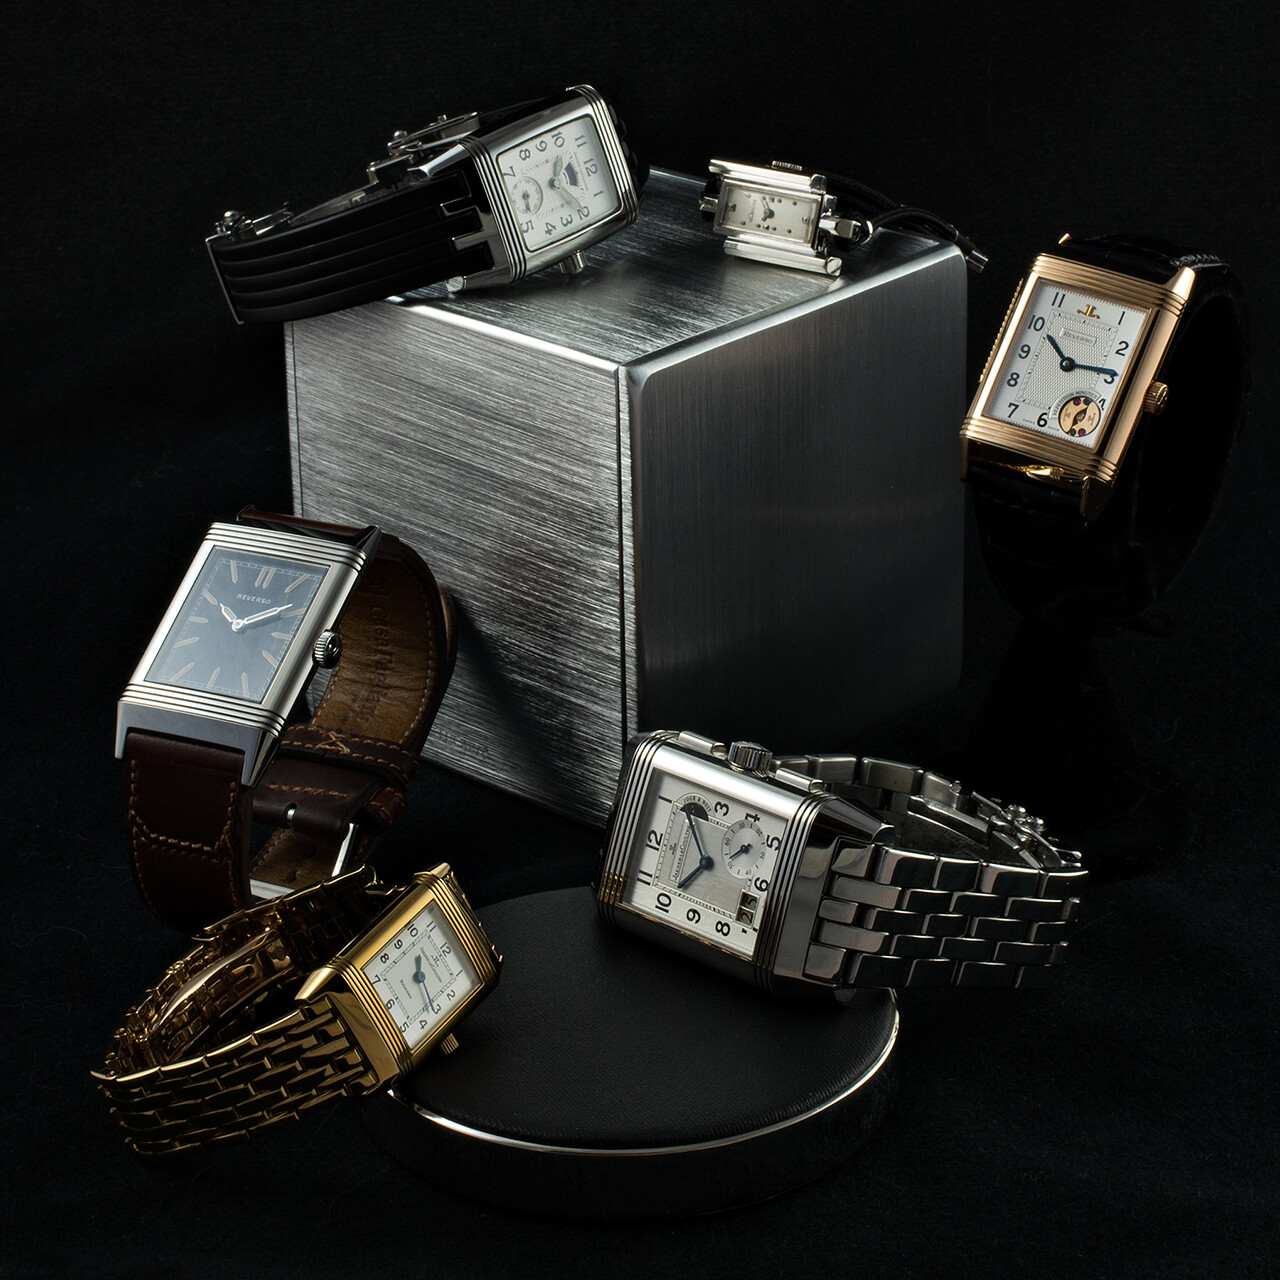 LeCoultre love, his and hers, including three of MrsG’s watches: Reverso Duetto GranSport (top left), a vintage LeCoultre (top, center), and Reverso Lady (bottom center)